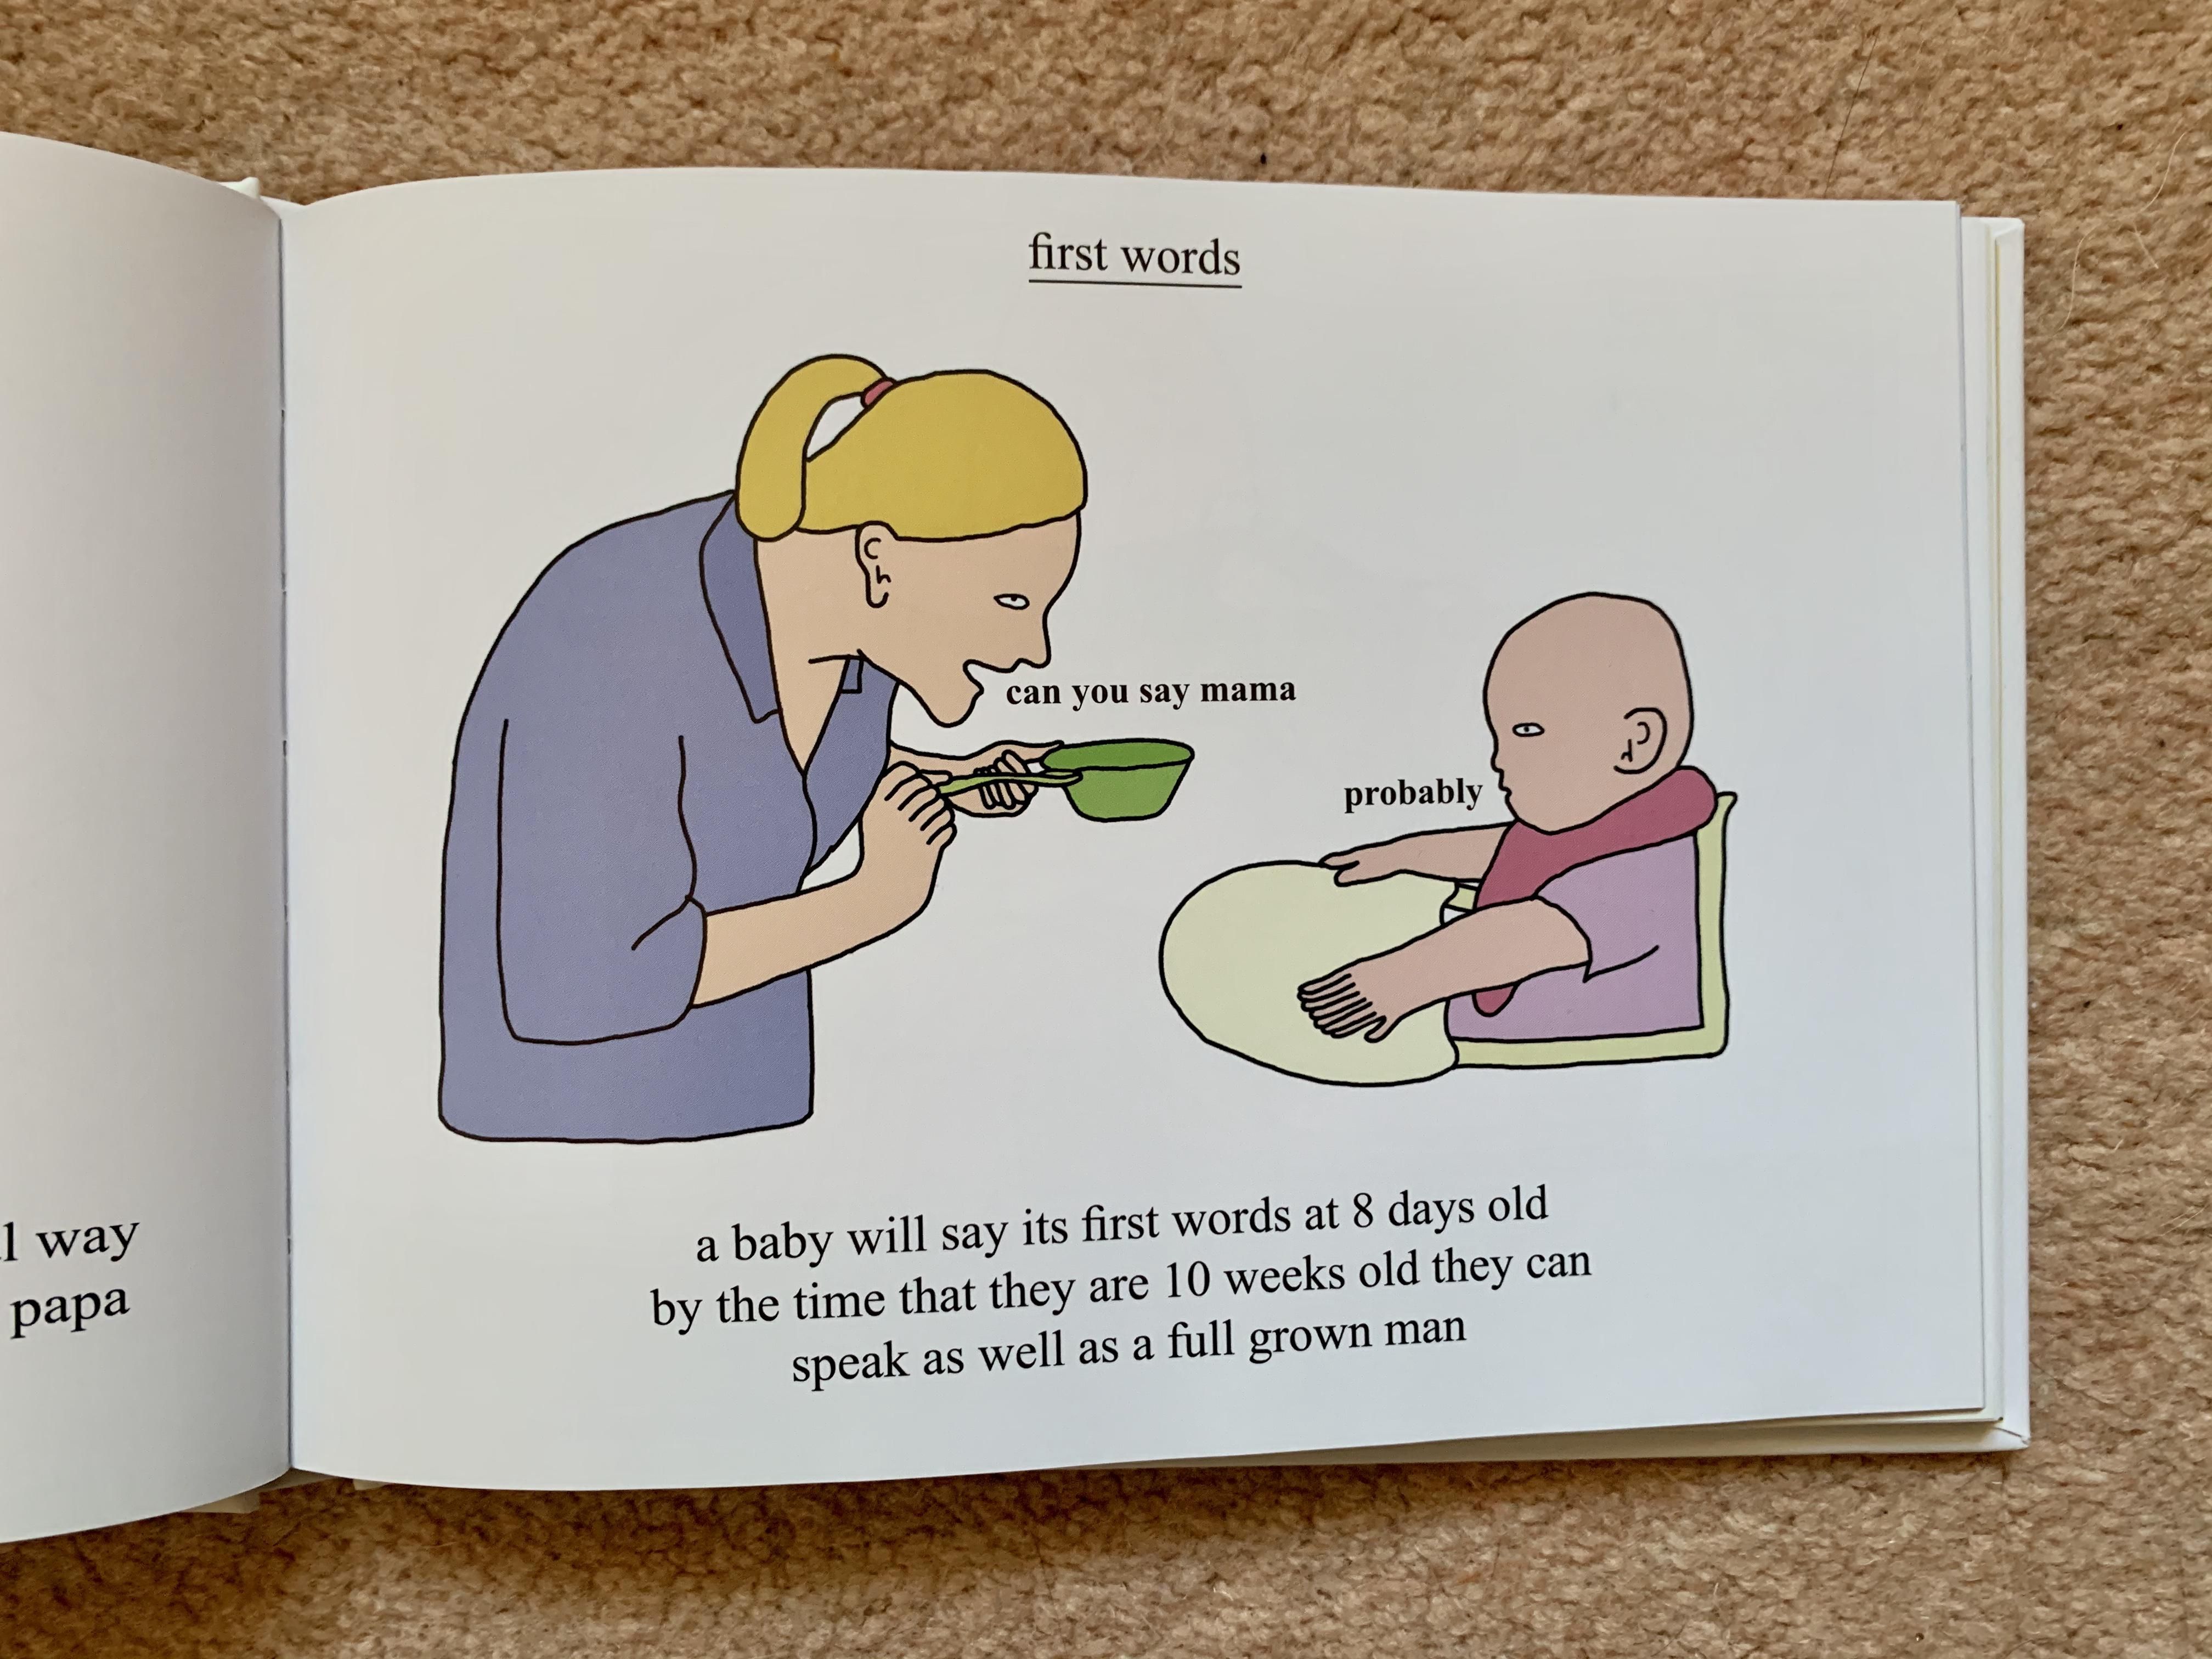 As a soon to be first time parent, this parenting book has been so educational.